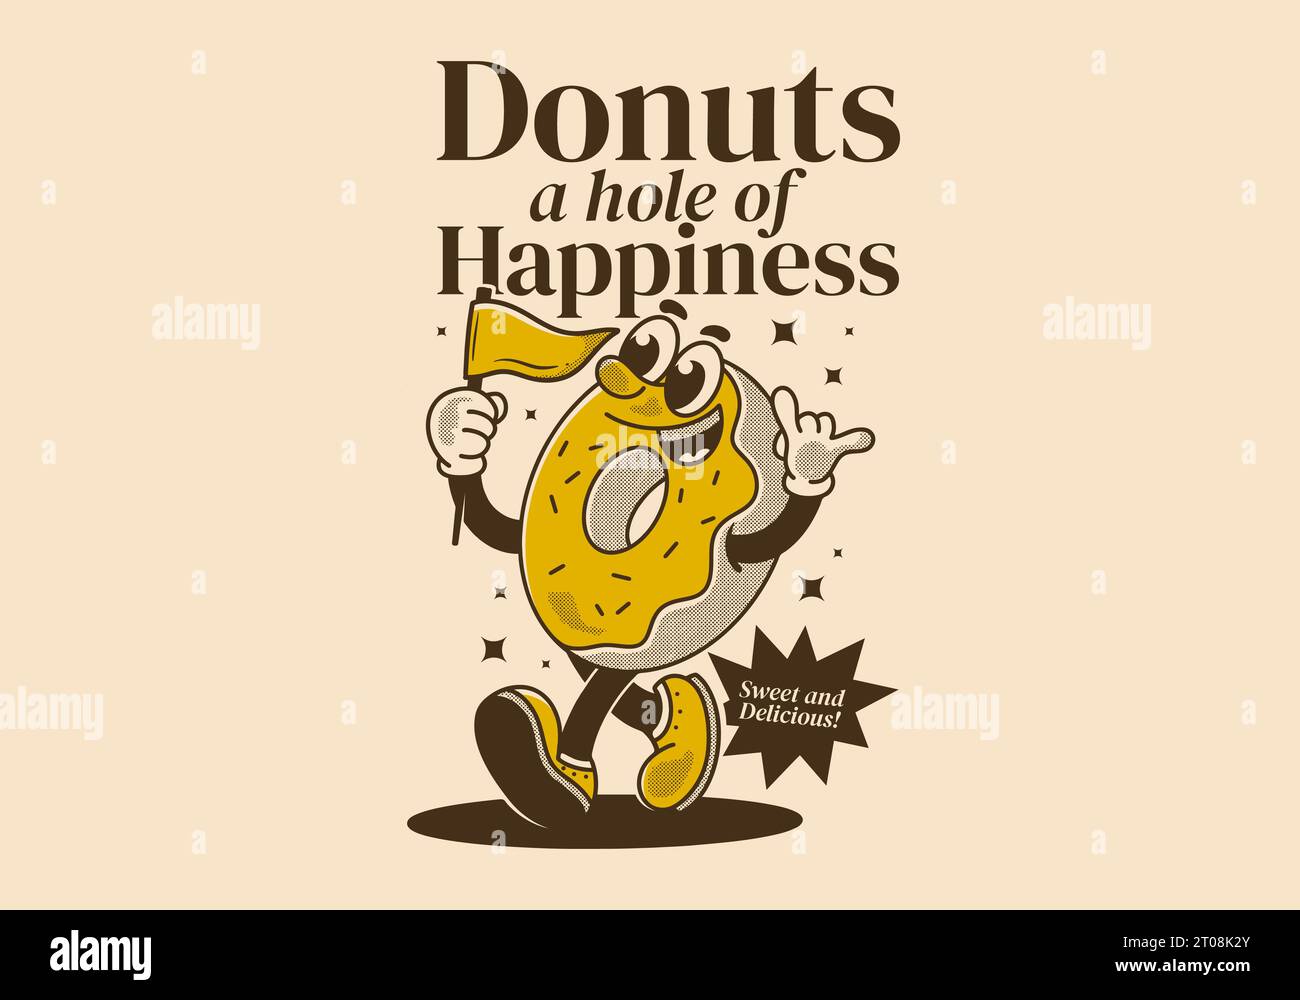 Donuts, a hole of happiness. Vintage mascot character illustration of walking donuts holding a flag Stock Vector